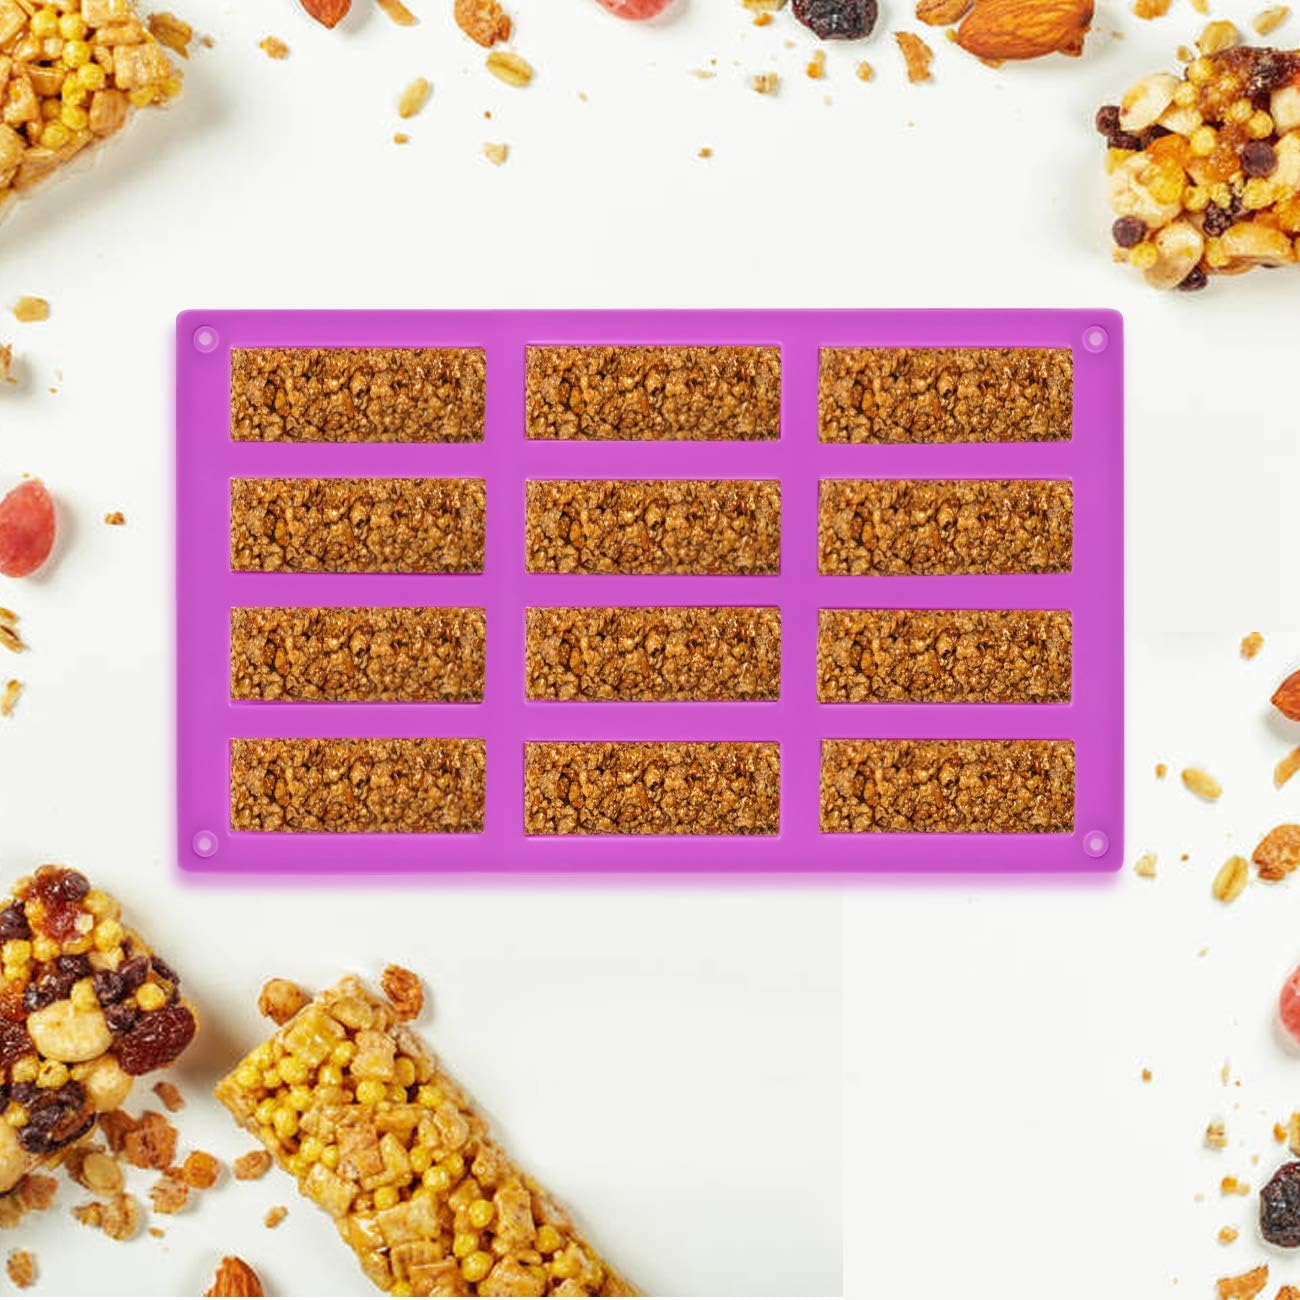 Zezzxu 8 Cavity Rectangle Granola Bar Silicone Mold 2 Pack Cereal Energy Bar Mold Butter Mold for Ganache Chocolate Bar Truffles Cheesecake Pudding